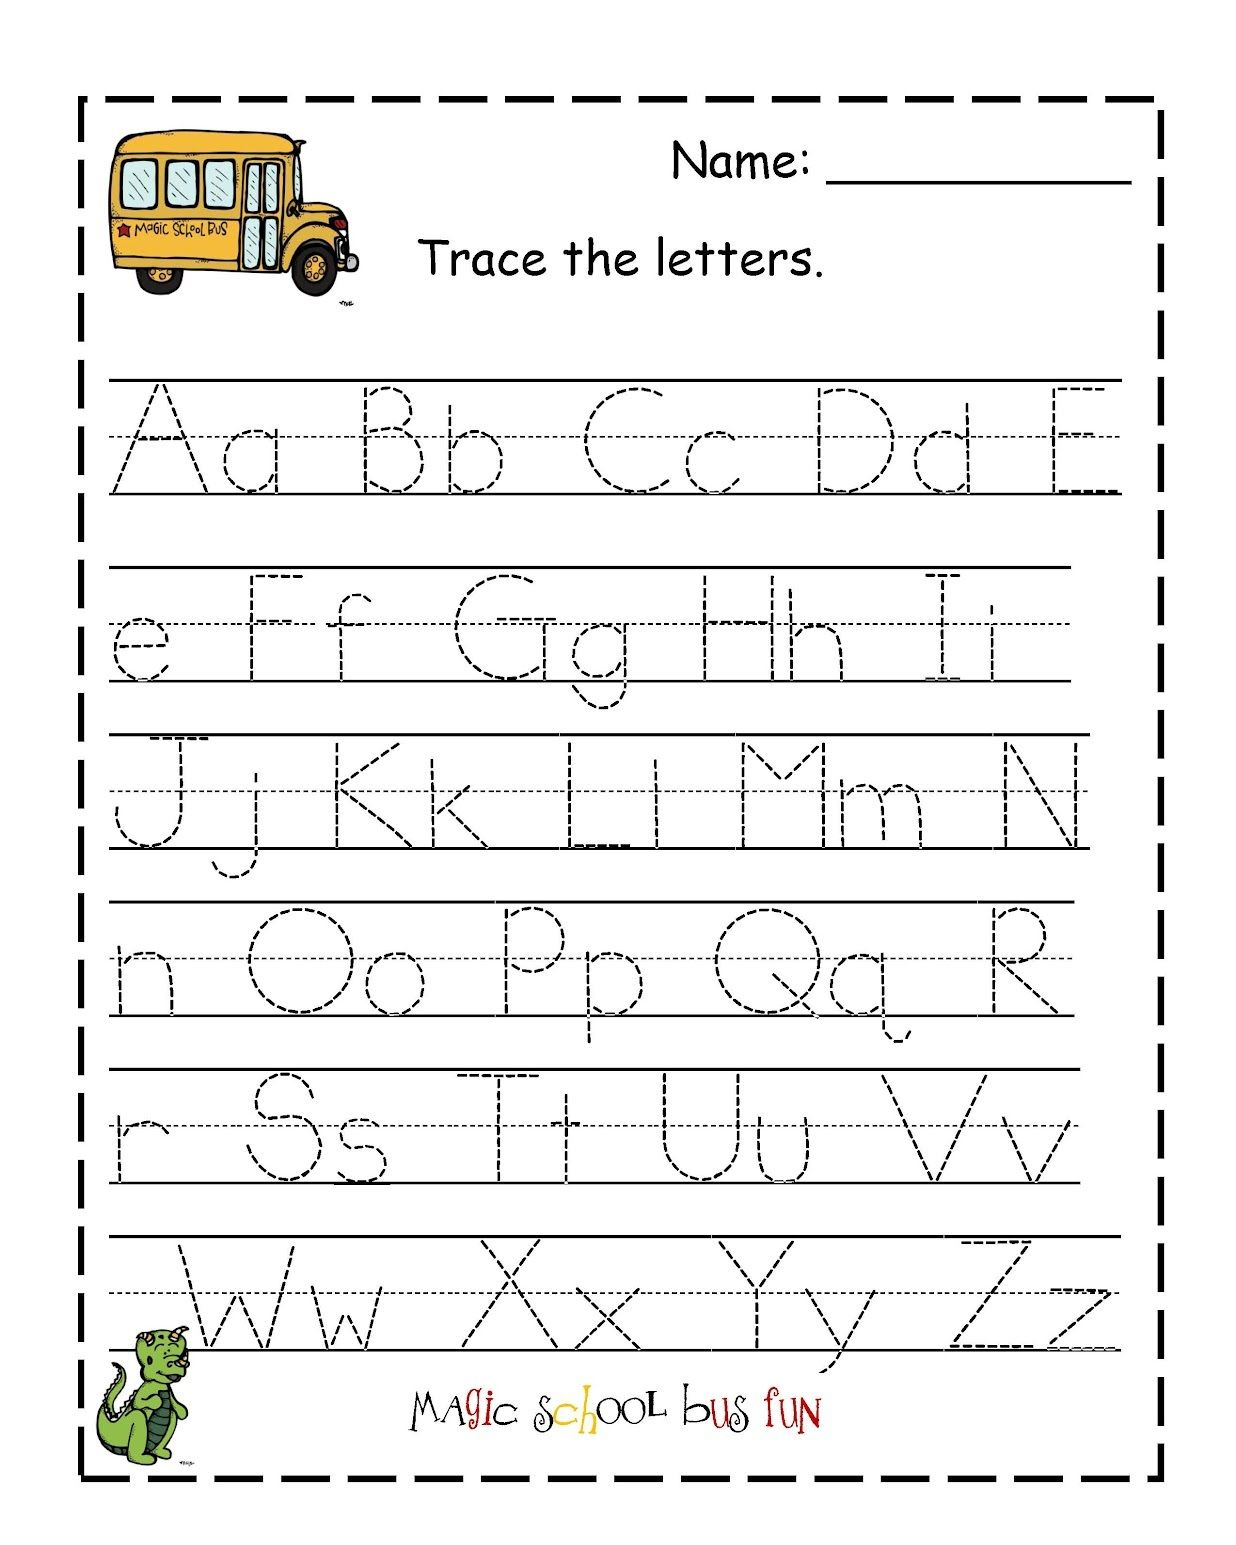 Tracing Letters Worksheets To Print TracingLettersWorksheets